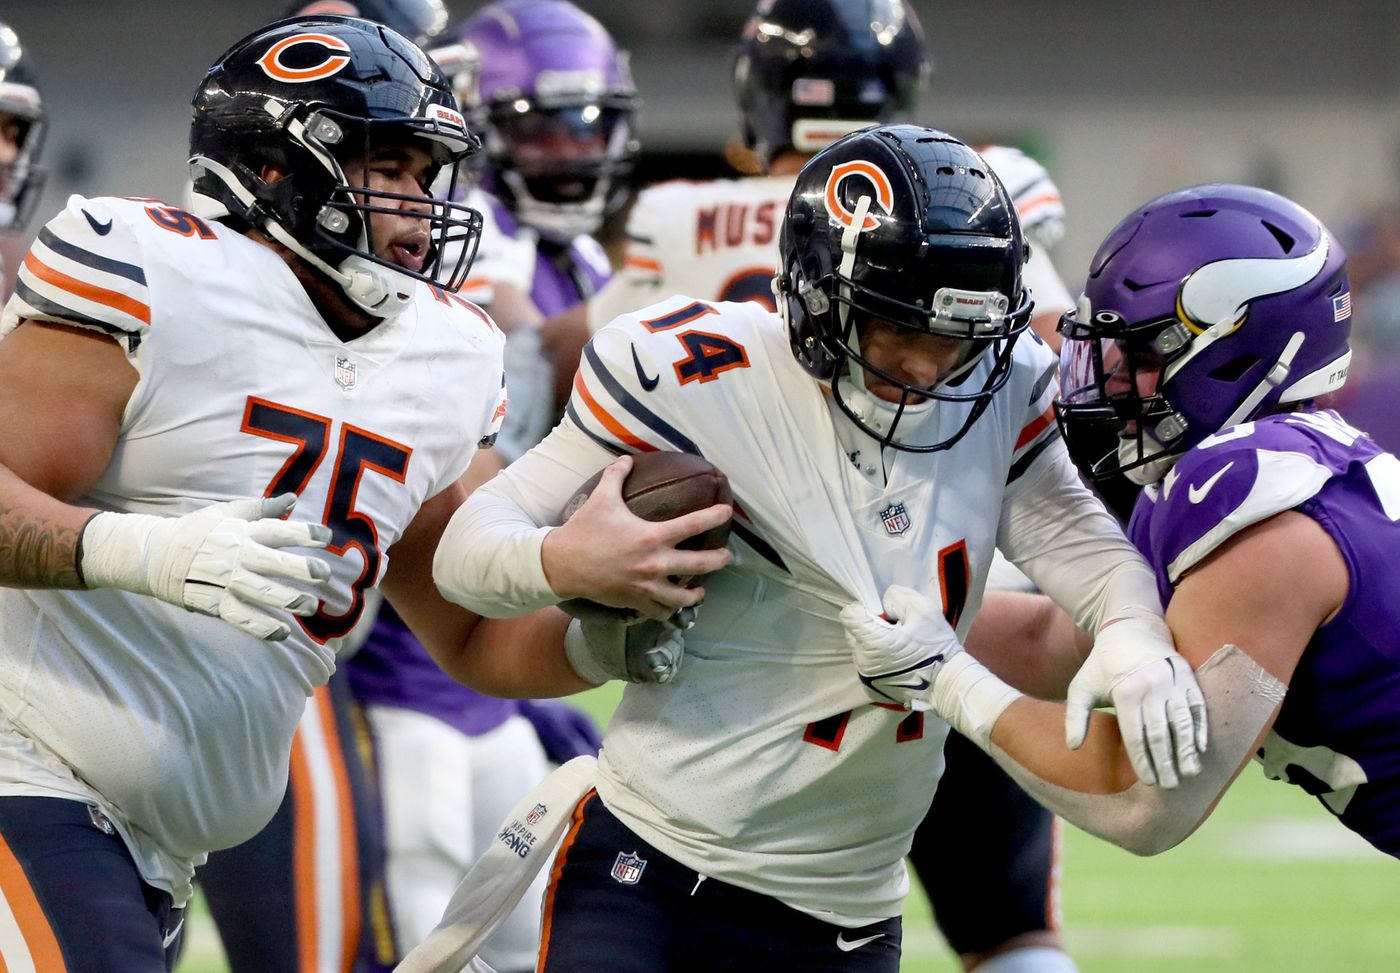 Bears quarterback Andy Dalton is sacked by Vikings defensive end Kenny Willekes on Jan. 9, 2022. Dalton was sacked seven times in the Week 18 loss.